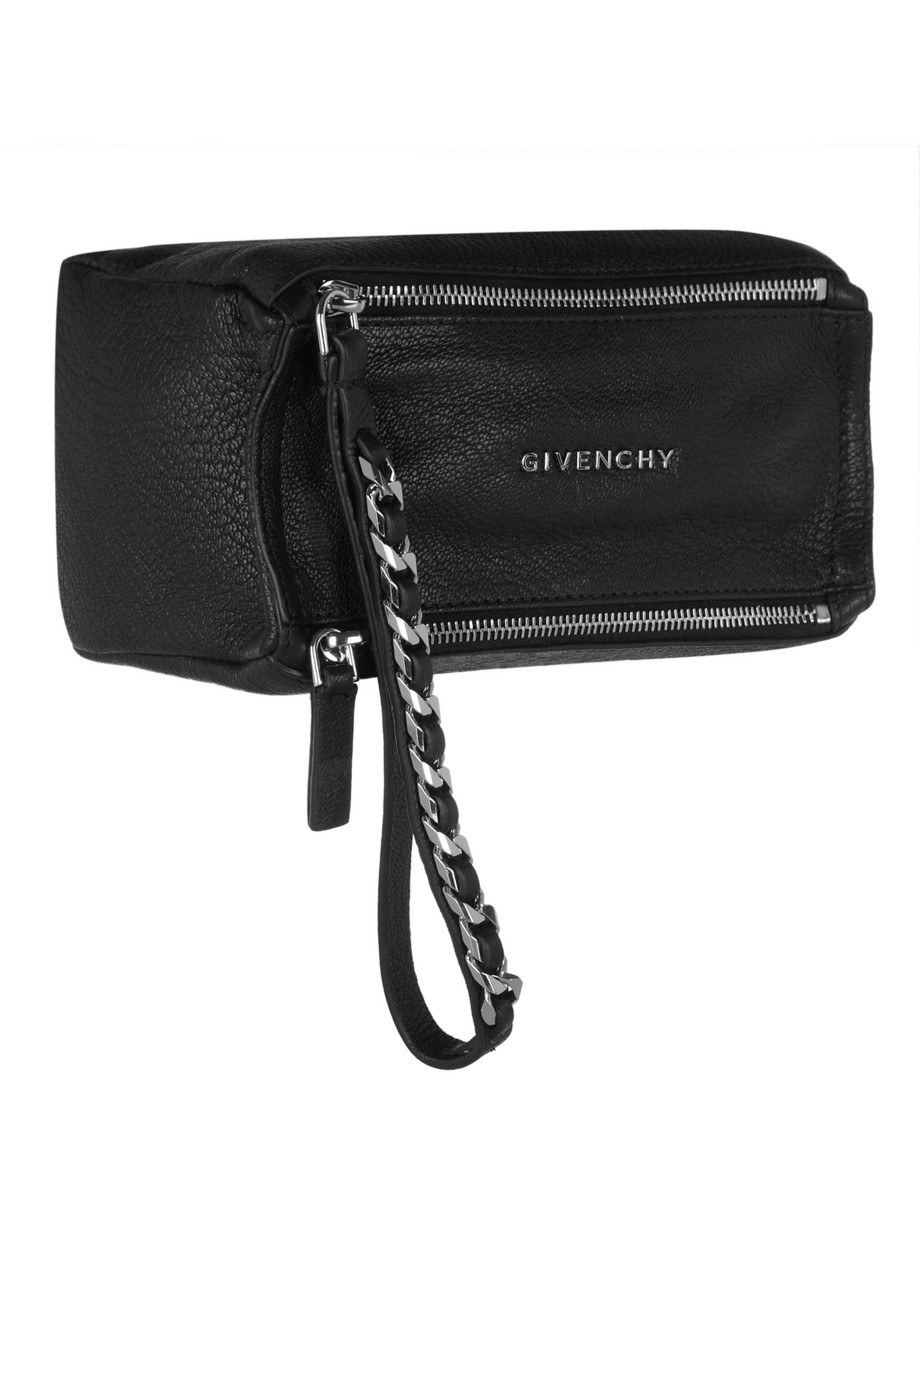 Givenchy Small Pandora Wristlet Bag In Black Textured-Leather - Lyst